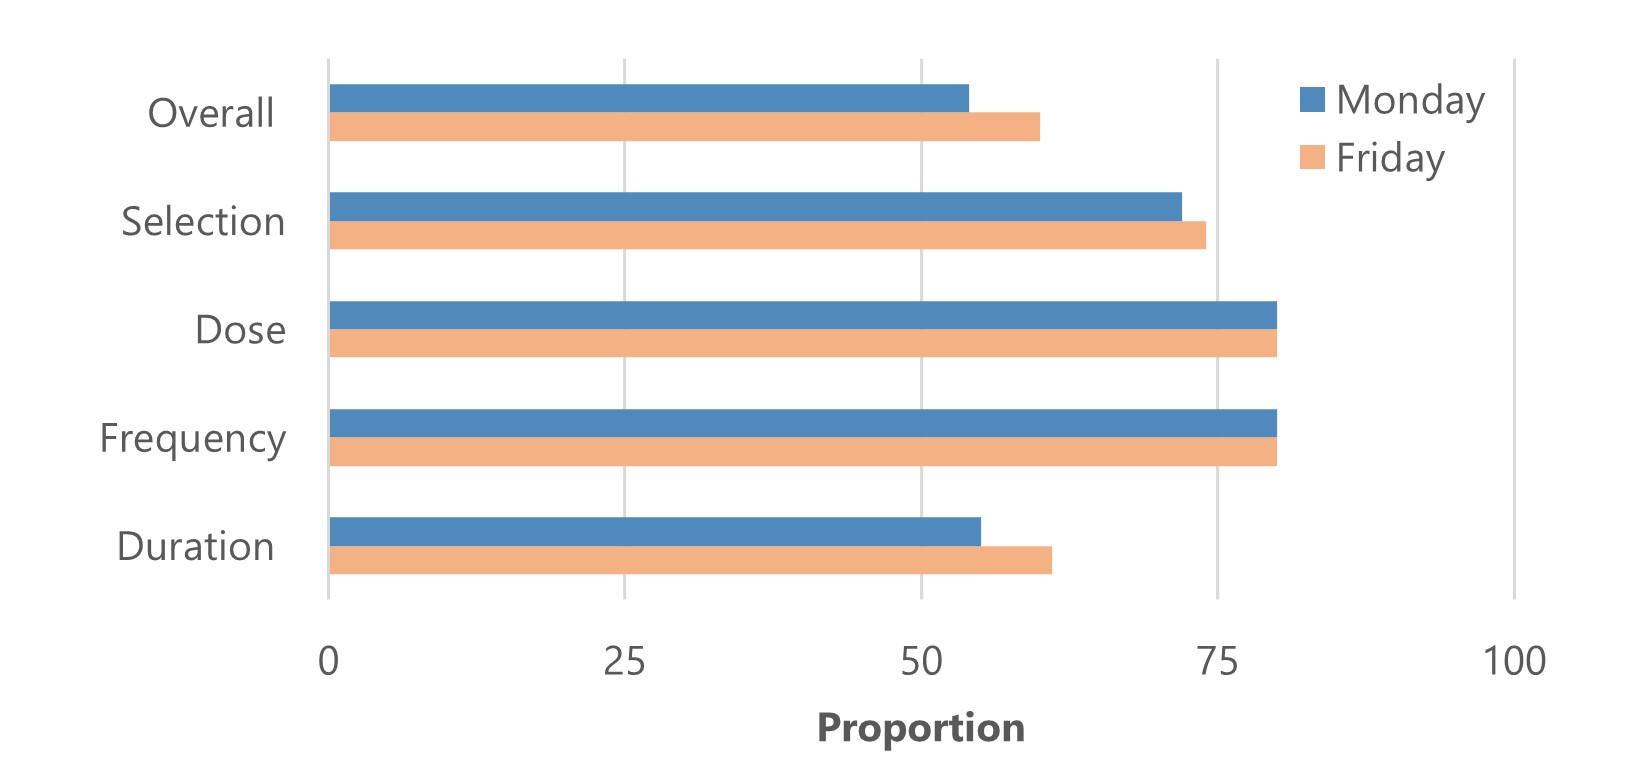 The image is a horizontal grouped bar chart titled "Rate of Antibiotic Appropriateness on Mondays vs. Fridays, n= 160". It illustrates the proportion of appropriate antibiotic prescriptions across four categories: Duration, Frequency, Dose, and Selection, as well as an Overall rate. For each category, there are two adjacent bars representing data for Monday (in blue) and Friday (in orange). The chart shows that Monday generally has higher rates of appropriateness in all categories, with the most noticeable difference in the 'Selection' category. The 'Duration' and 'Frequency' categories show the least variation between the days. The proportions are marked on a scale from 0 to 100 on the horizontal axis.